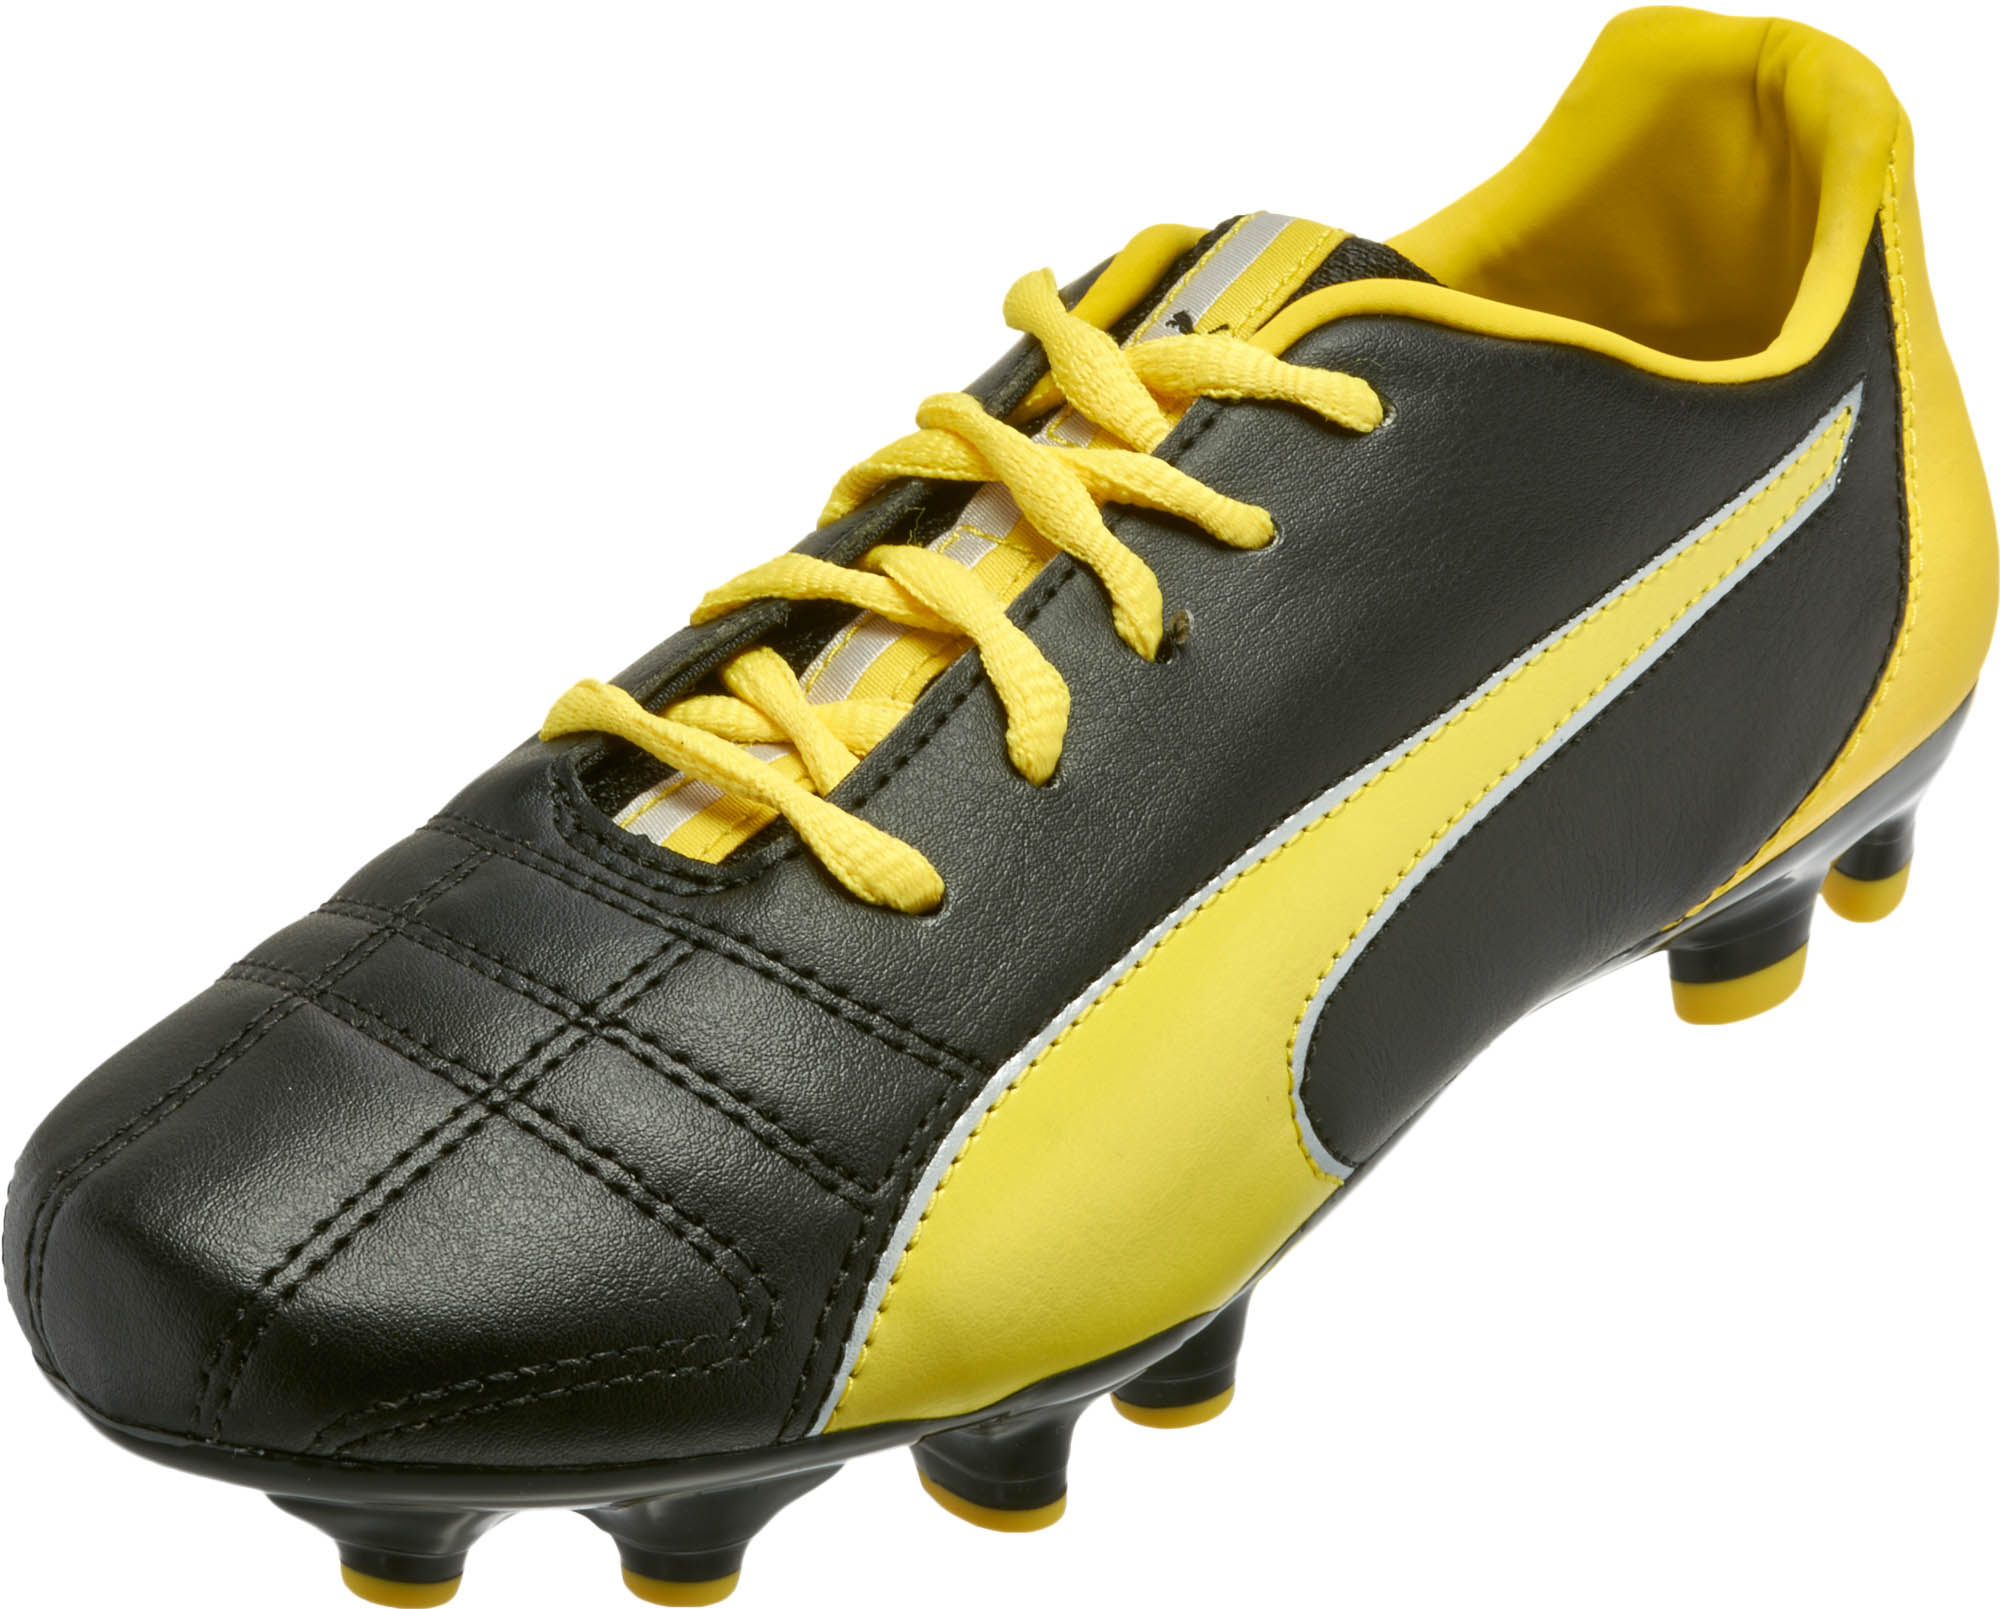 puma soccer shoes for kids